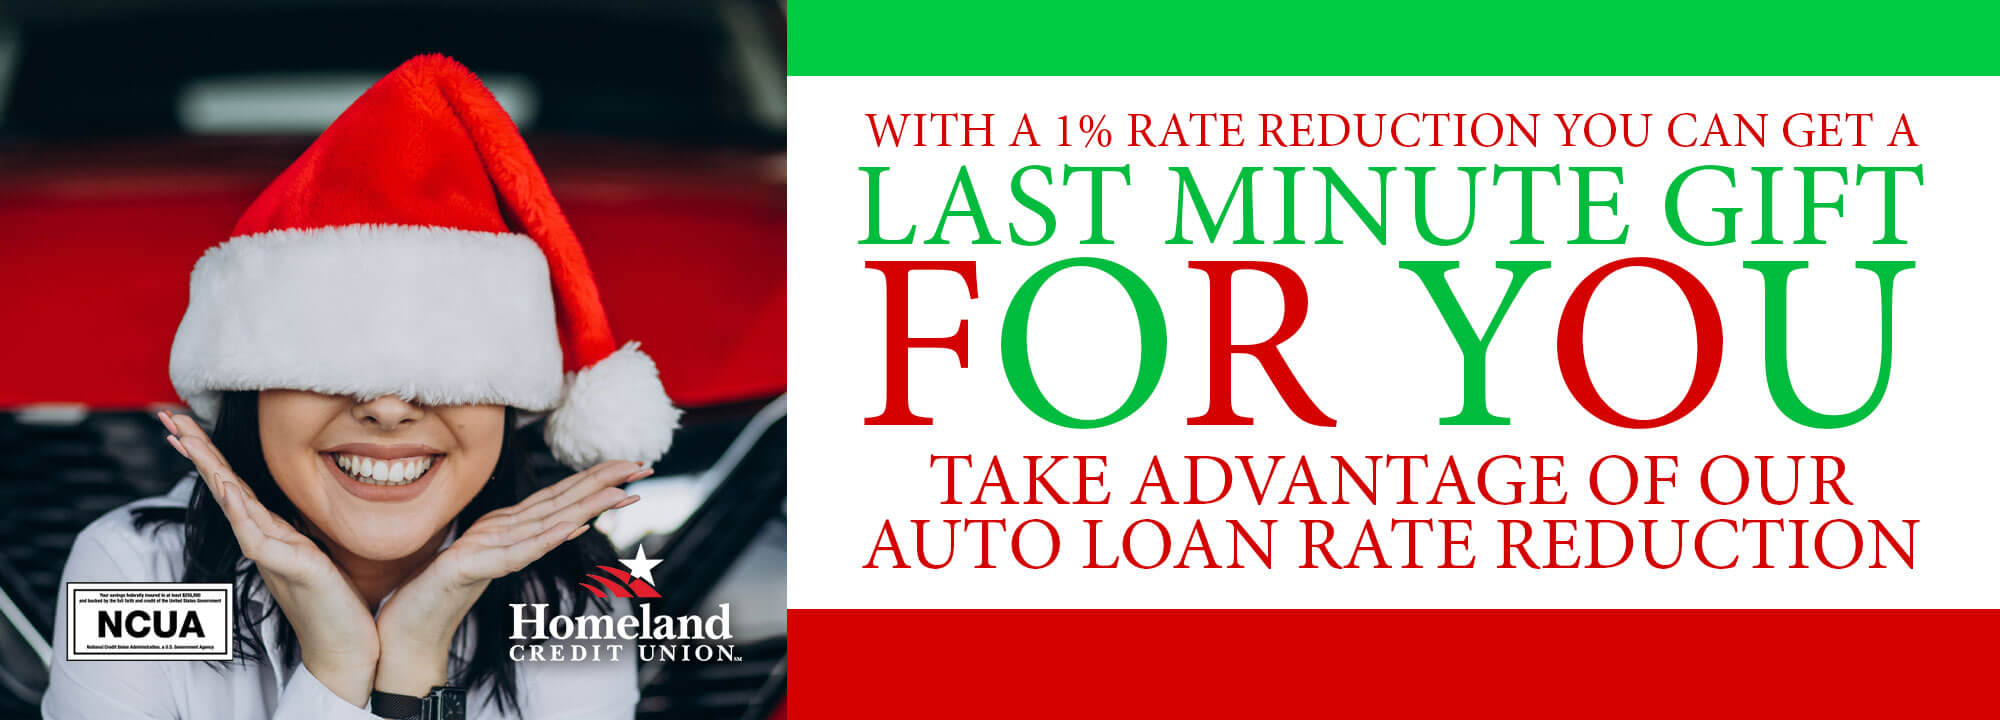 with a 1% rate reduction you can get a last minute gift for you. Take advantage of our auto loan rate reduction 